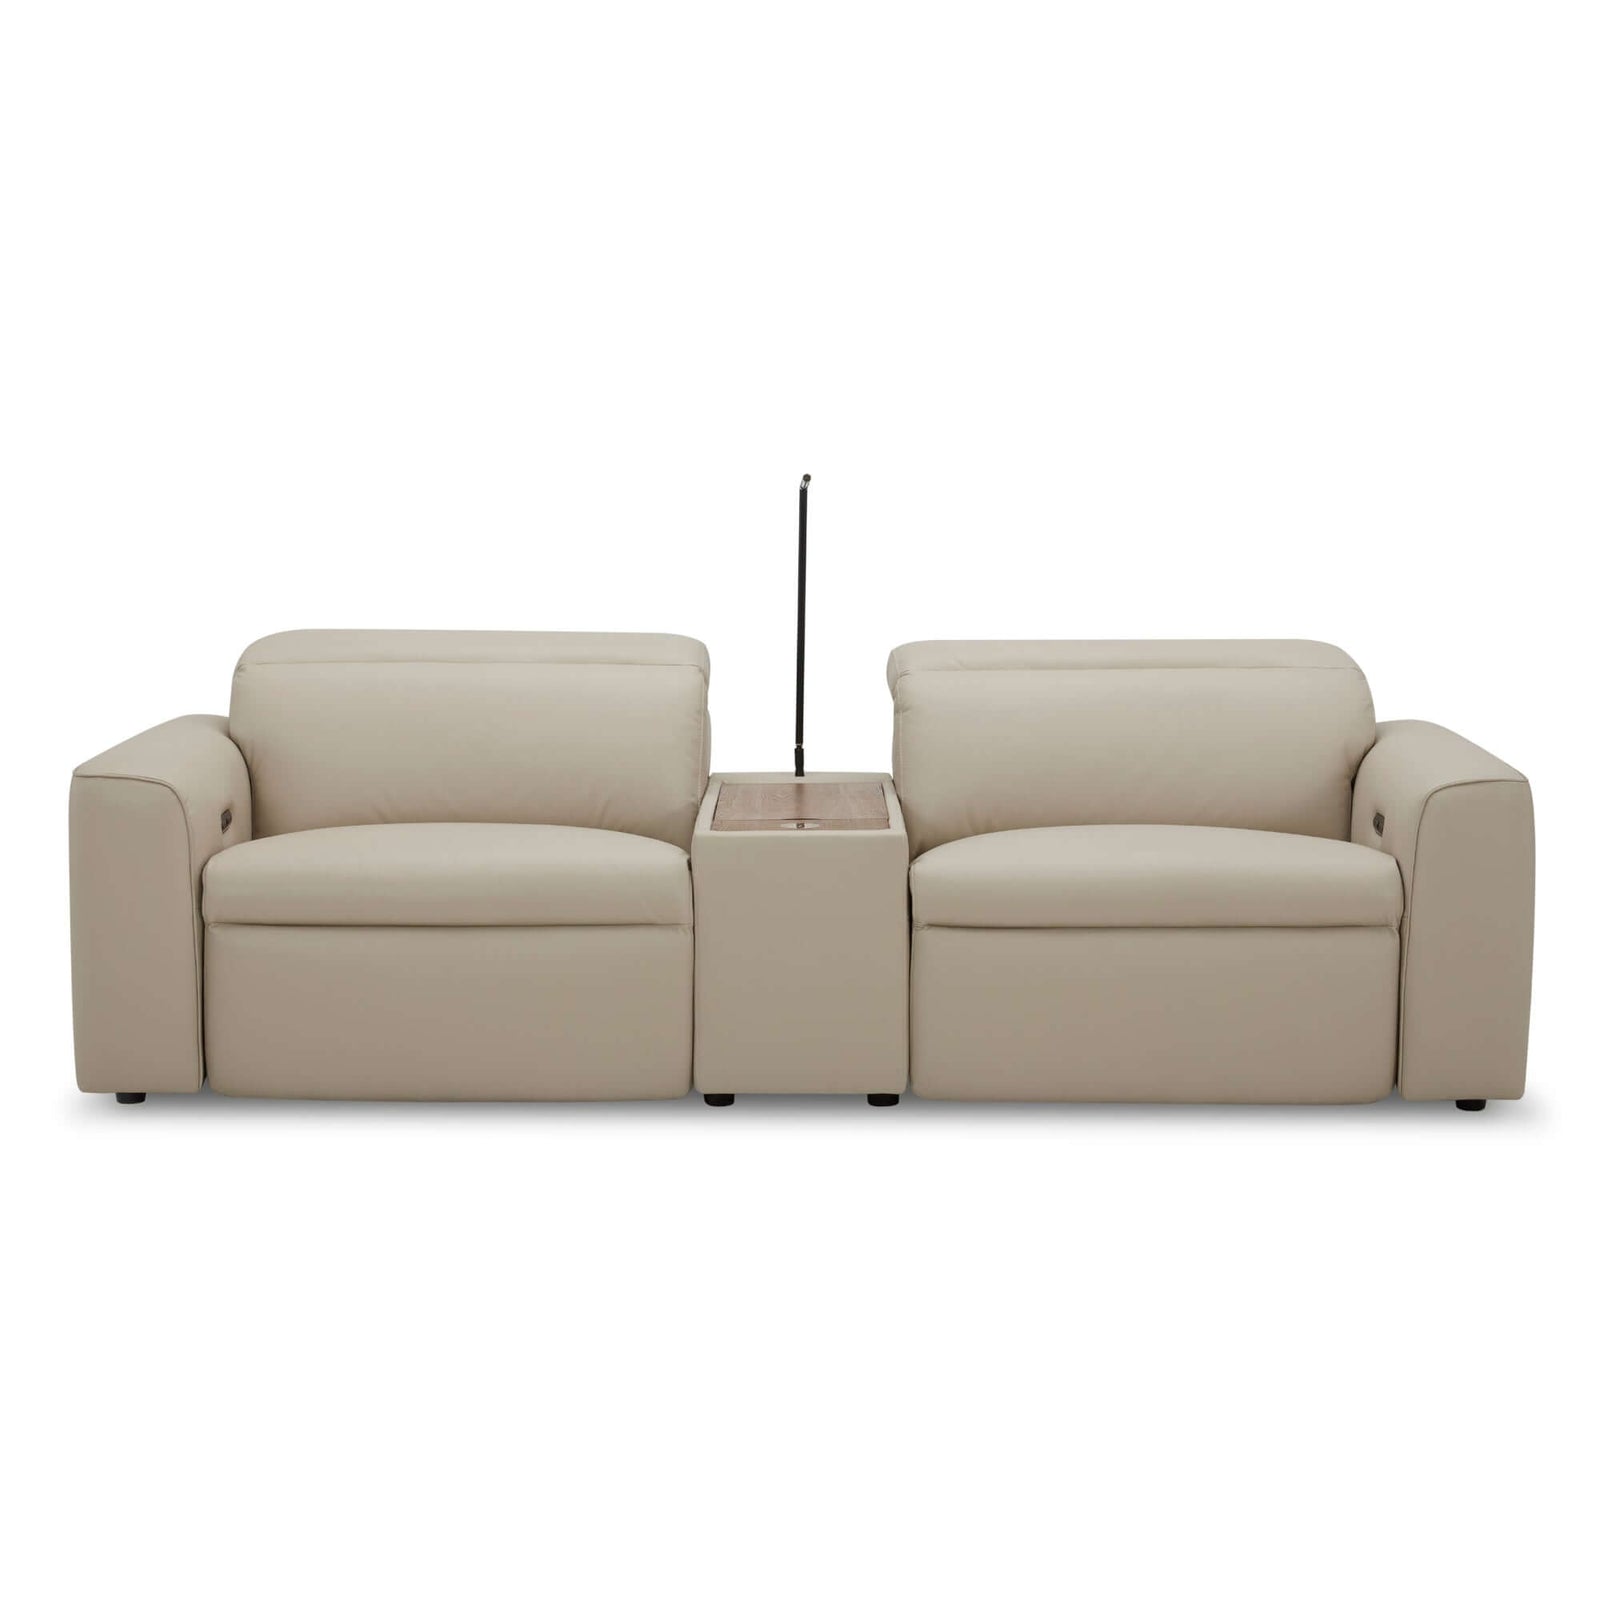 Hallie 2 Seater Genuine Leather Sofa Lounge Electric Powered Recliner Beige-Upinteriors